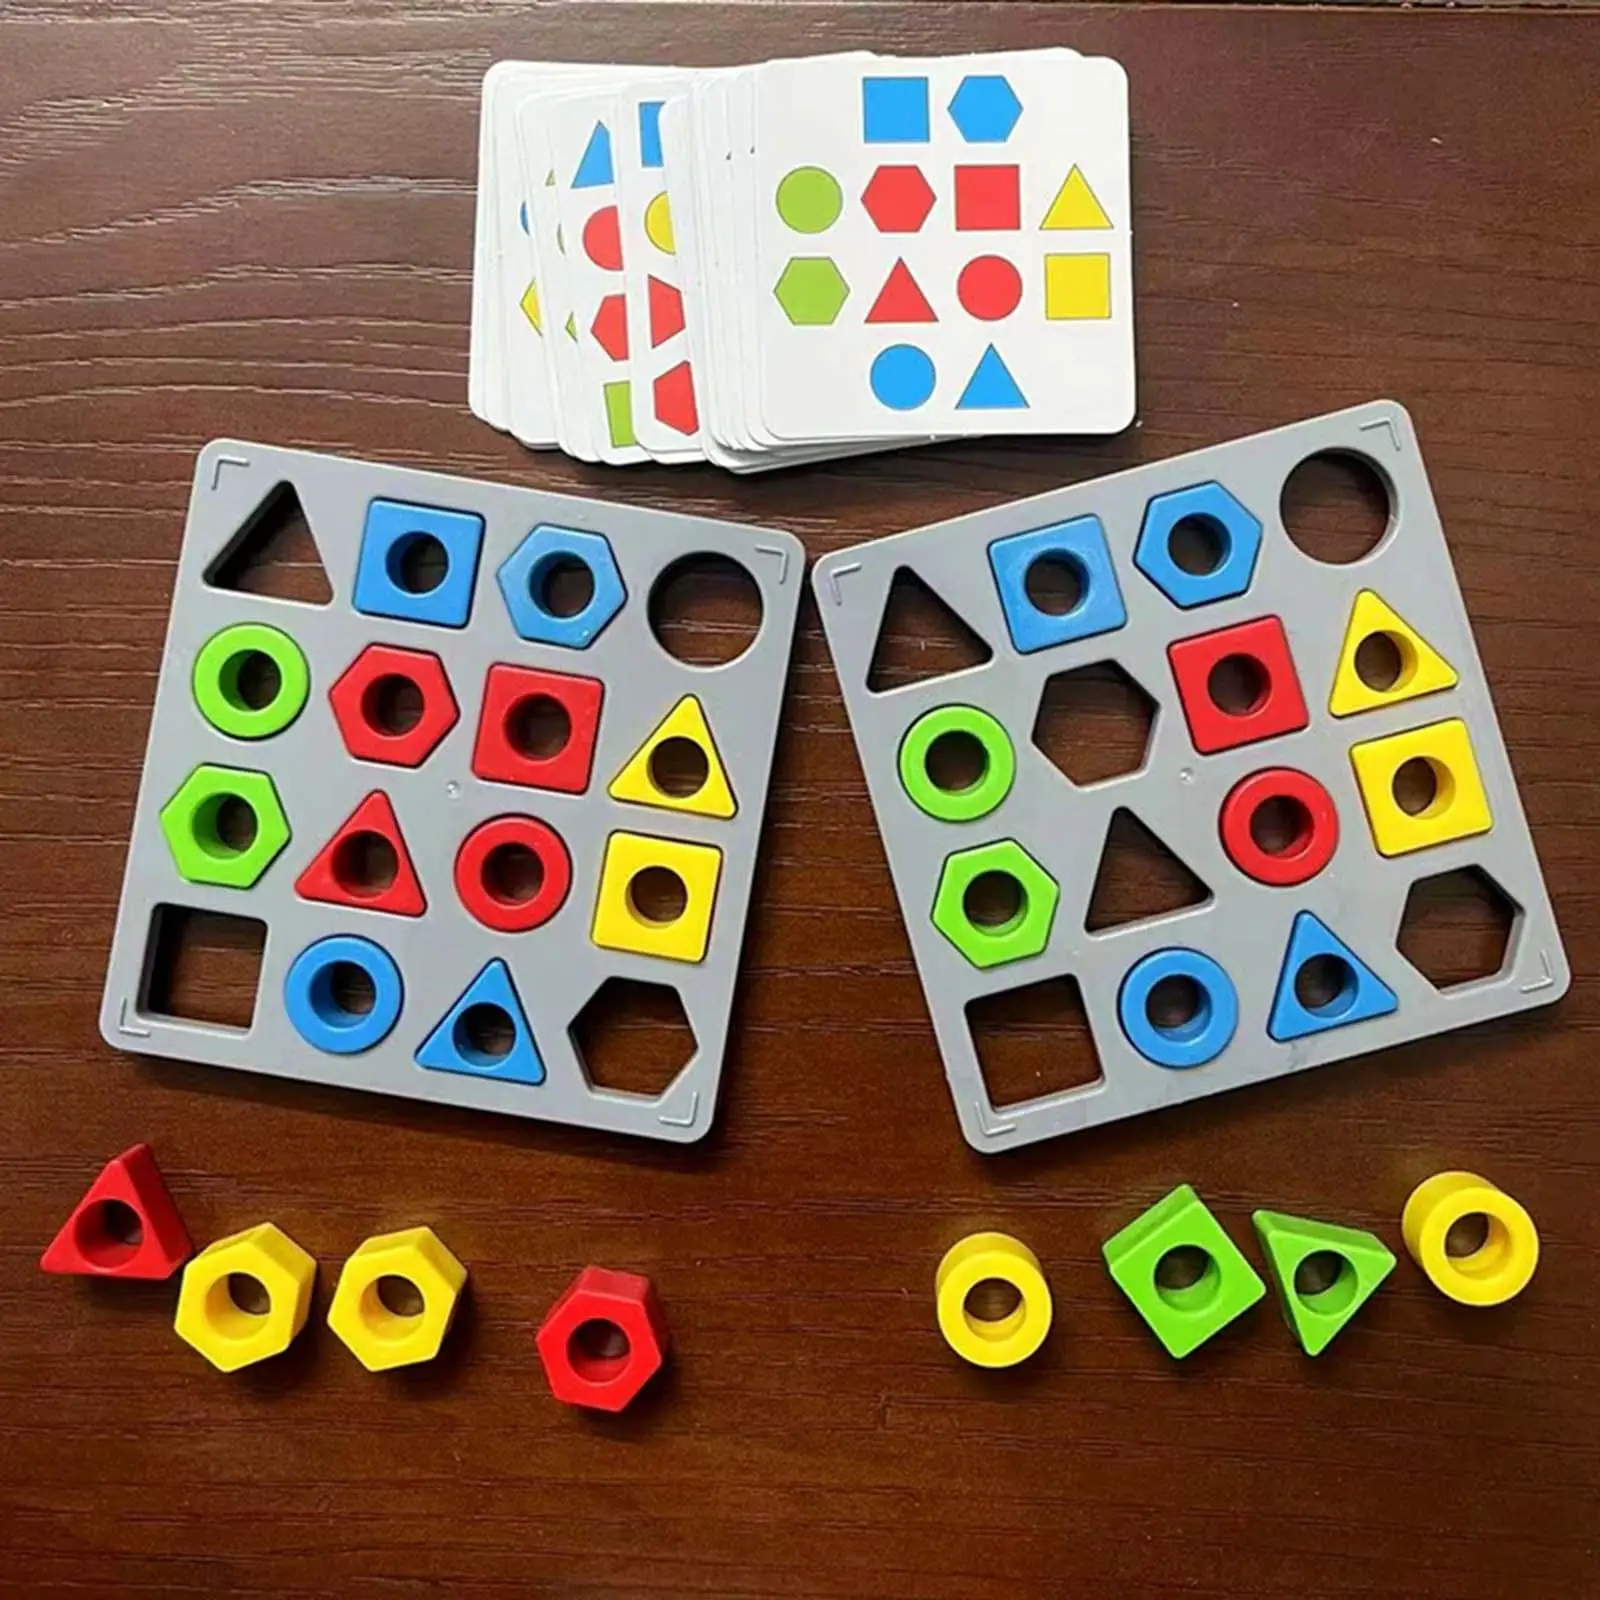 Shape Matching Game Interactive Battle Game Color Sensory Educational Toy for Kids 2 Players Toddlers Children 3-6 Years Old